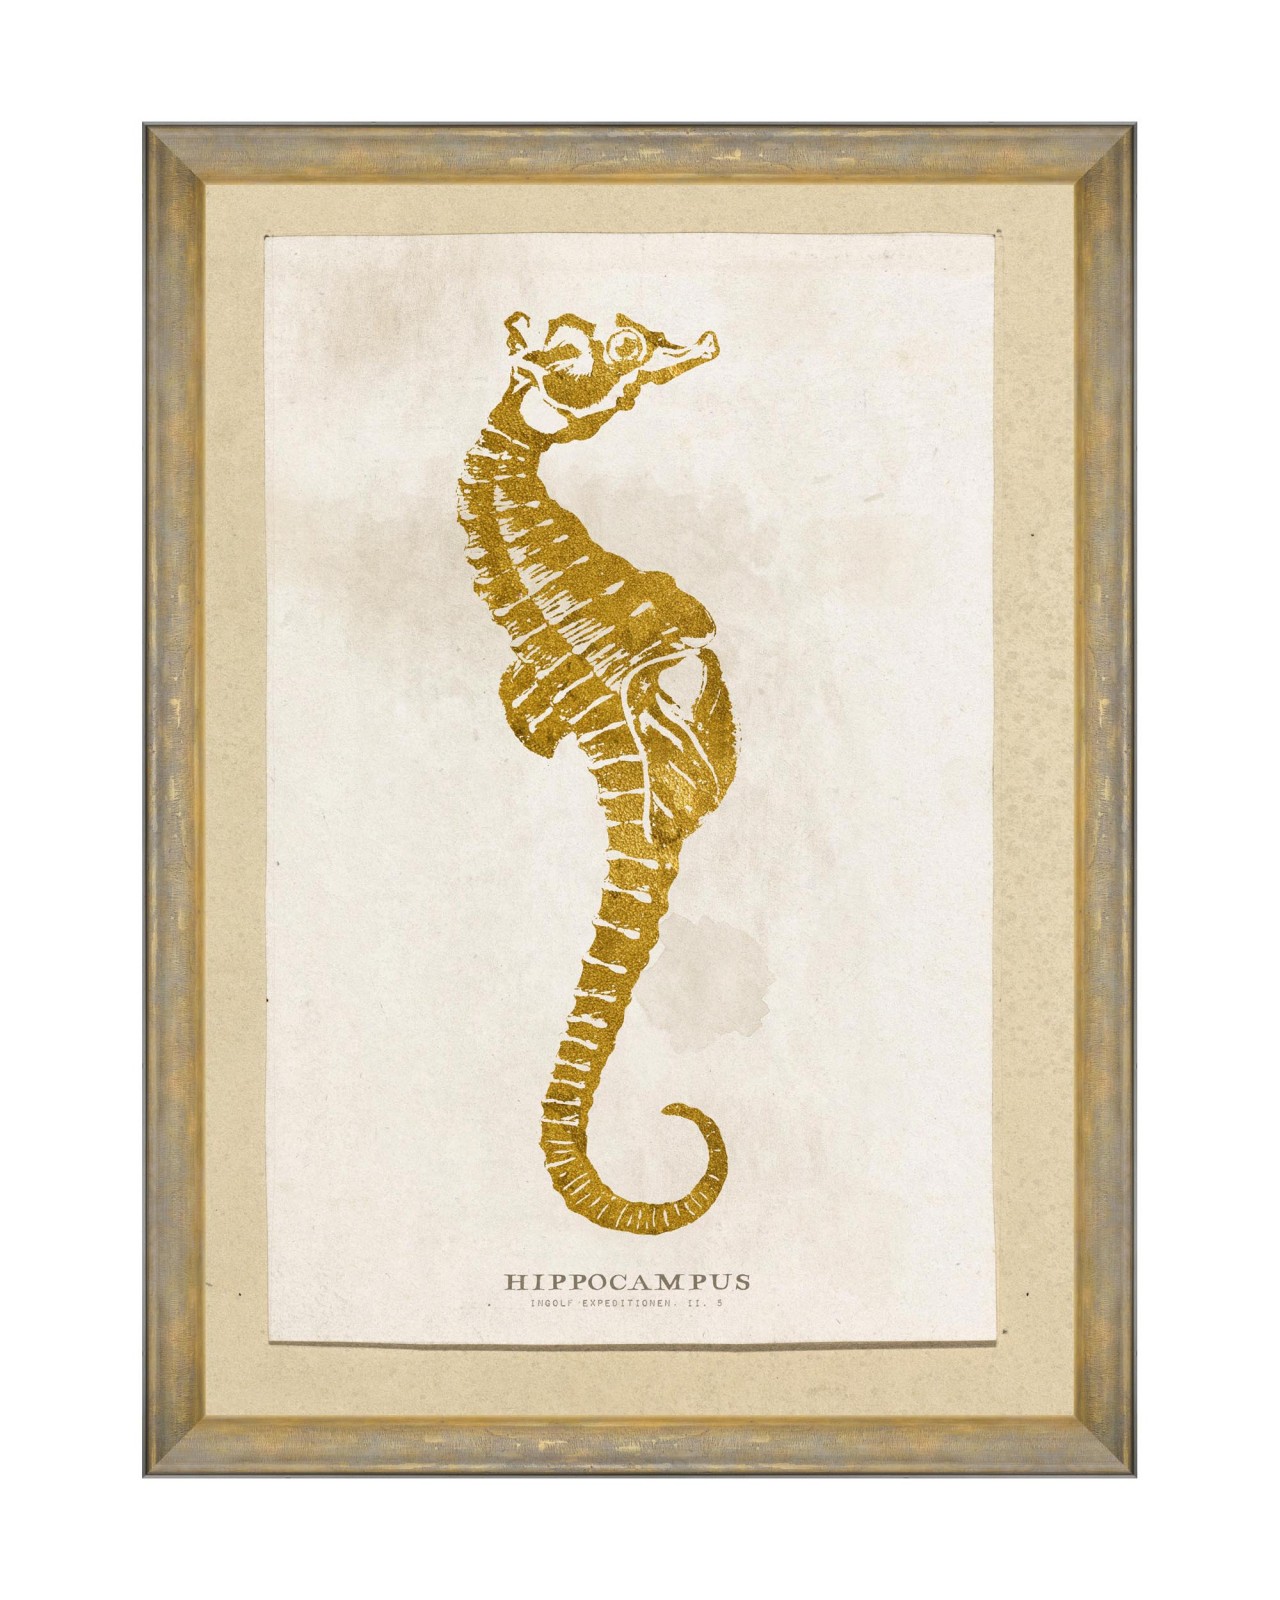 images/productimages/small/caribbean-sea-life-hippocampus-framed-art-50x70cm-fa13181.jpg